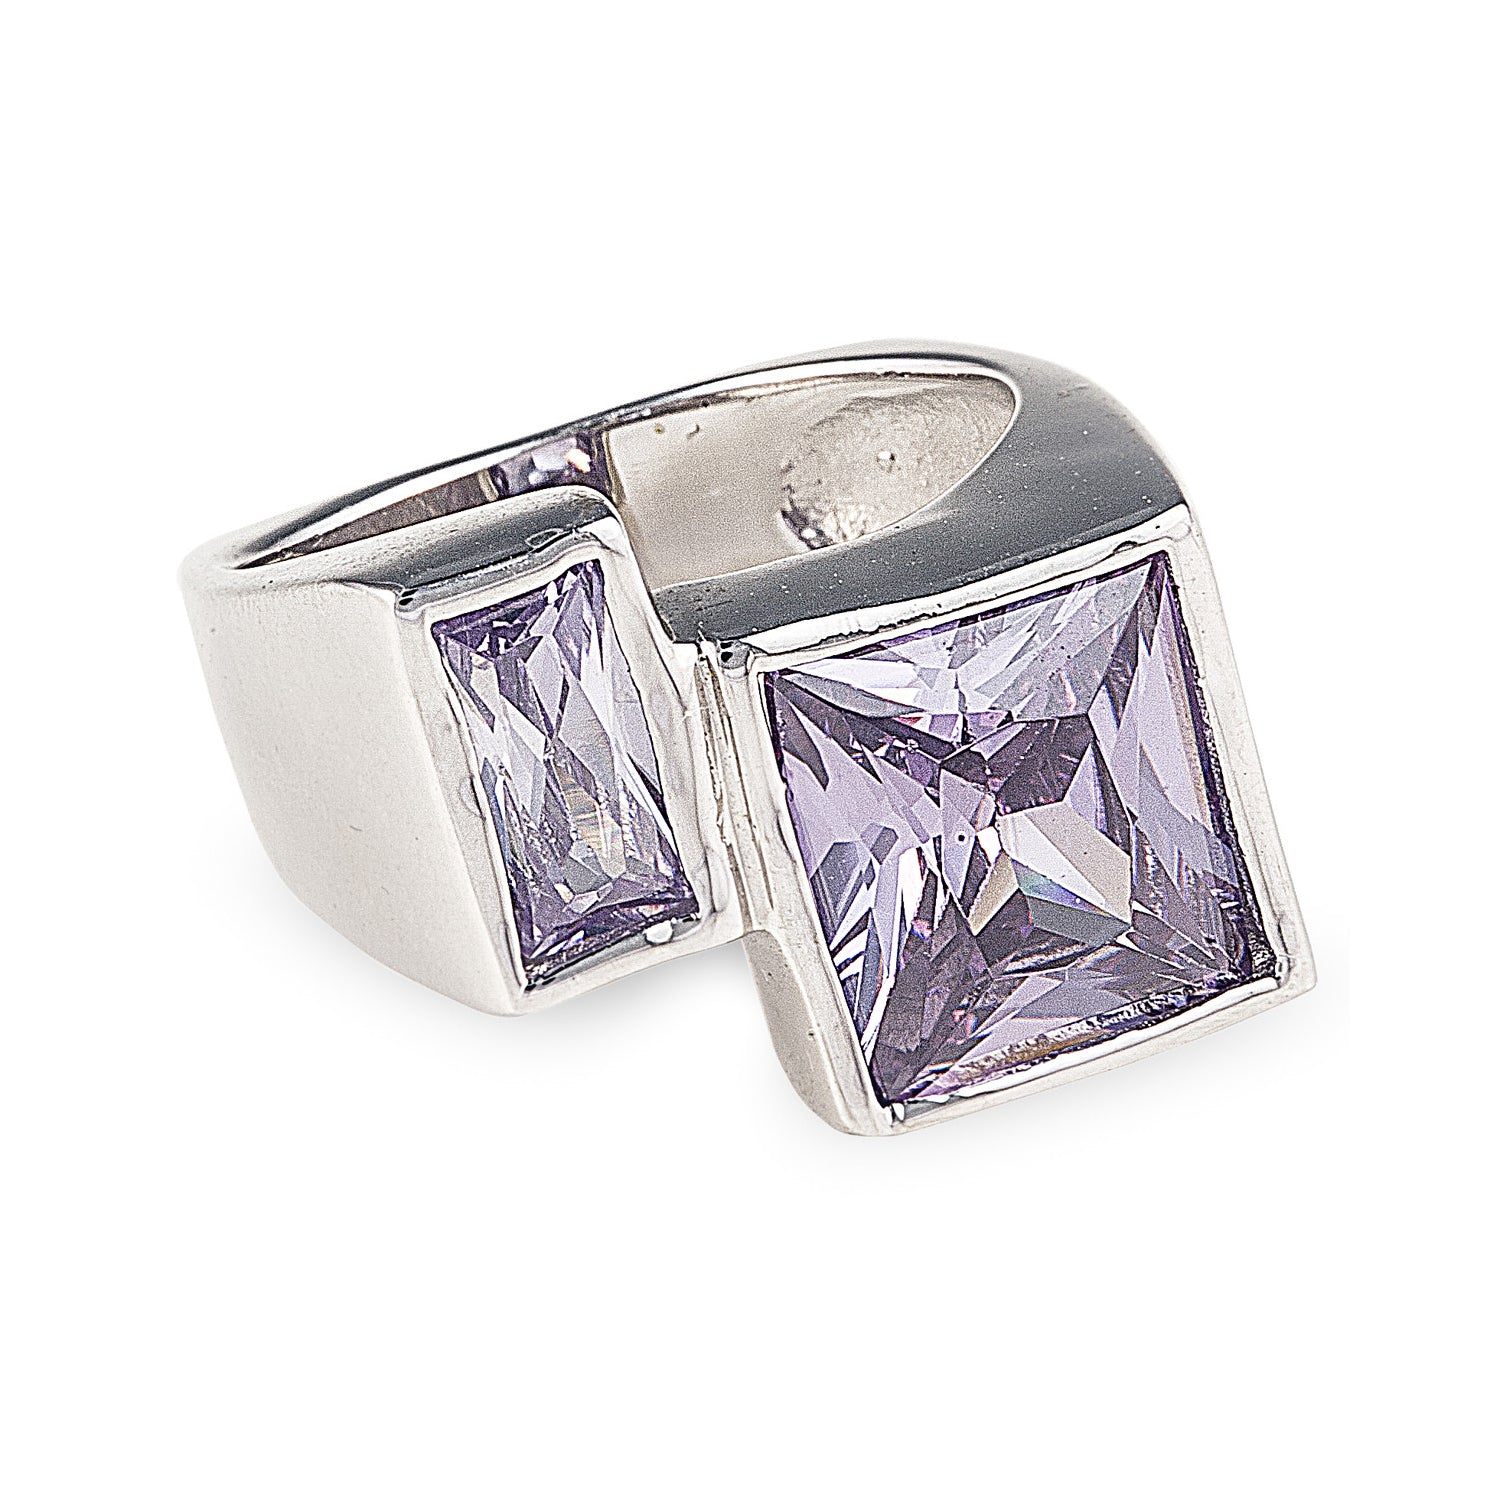 Lavender coloured rings in 925 sterling silver. Worldwide shipping